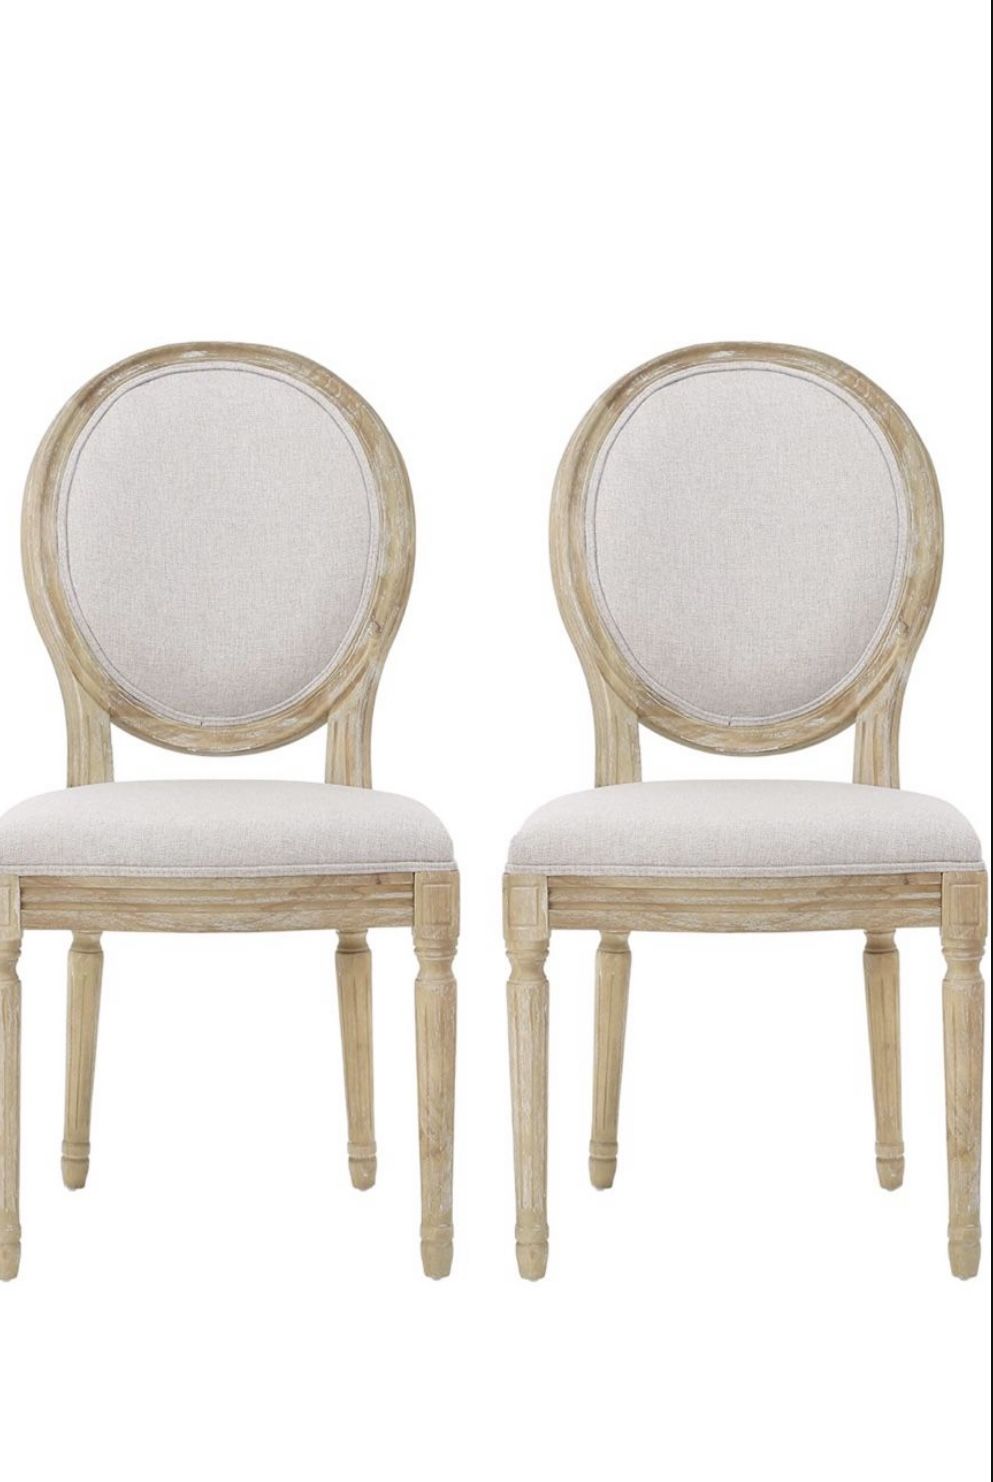 Dining Room Chairs Set Of 2 Chairs End Chairs